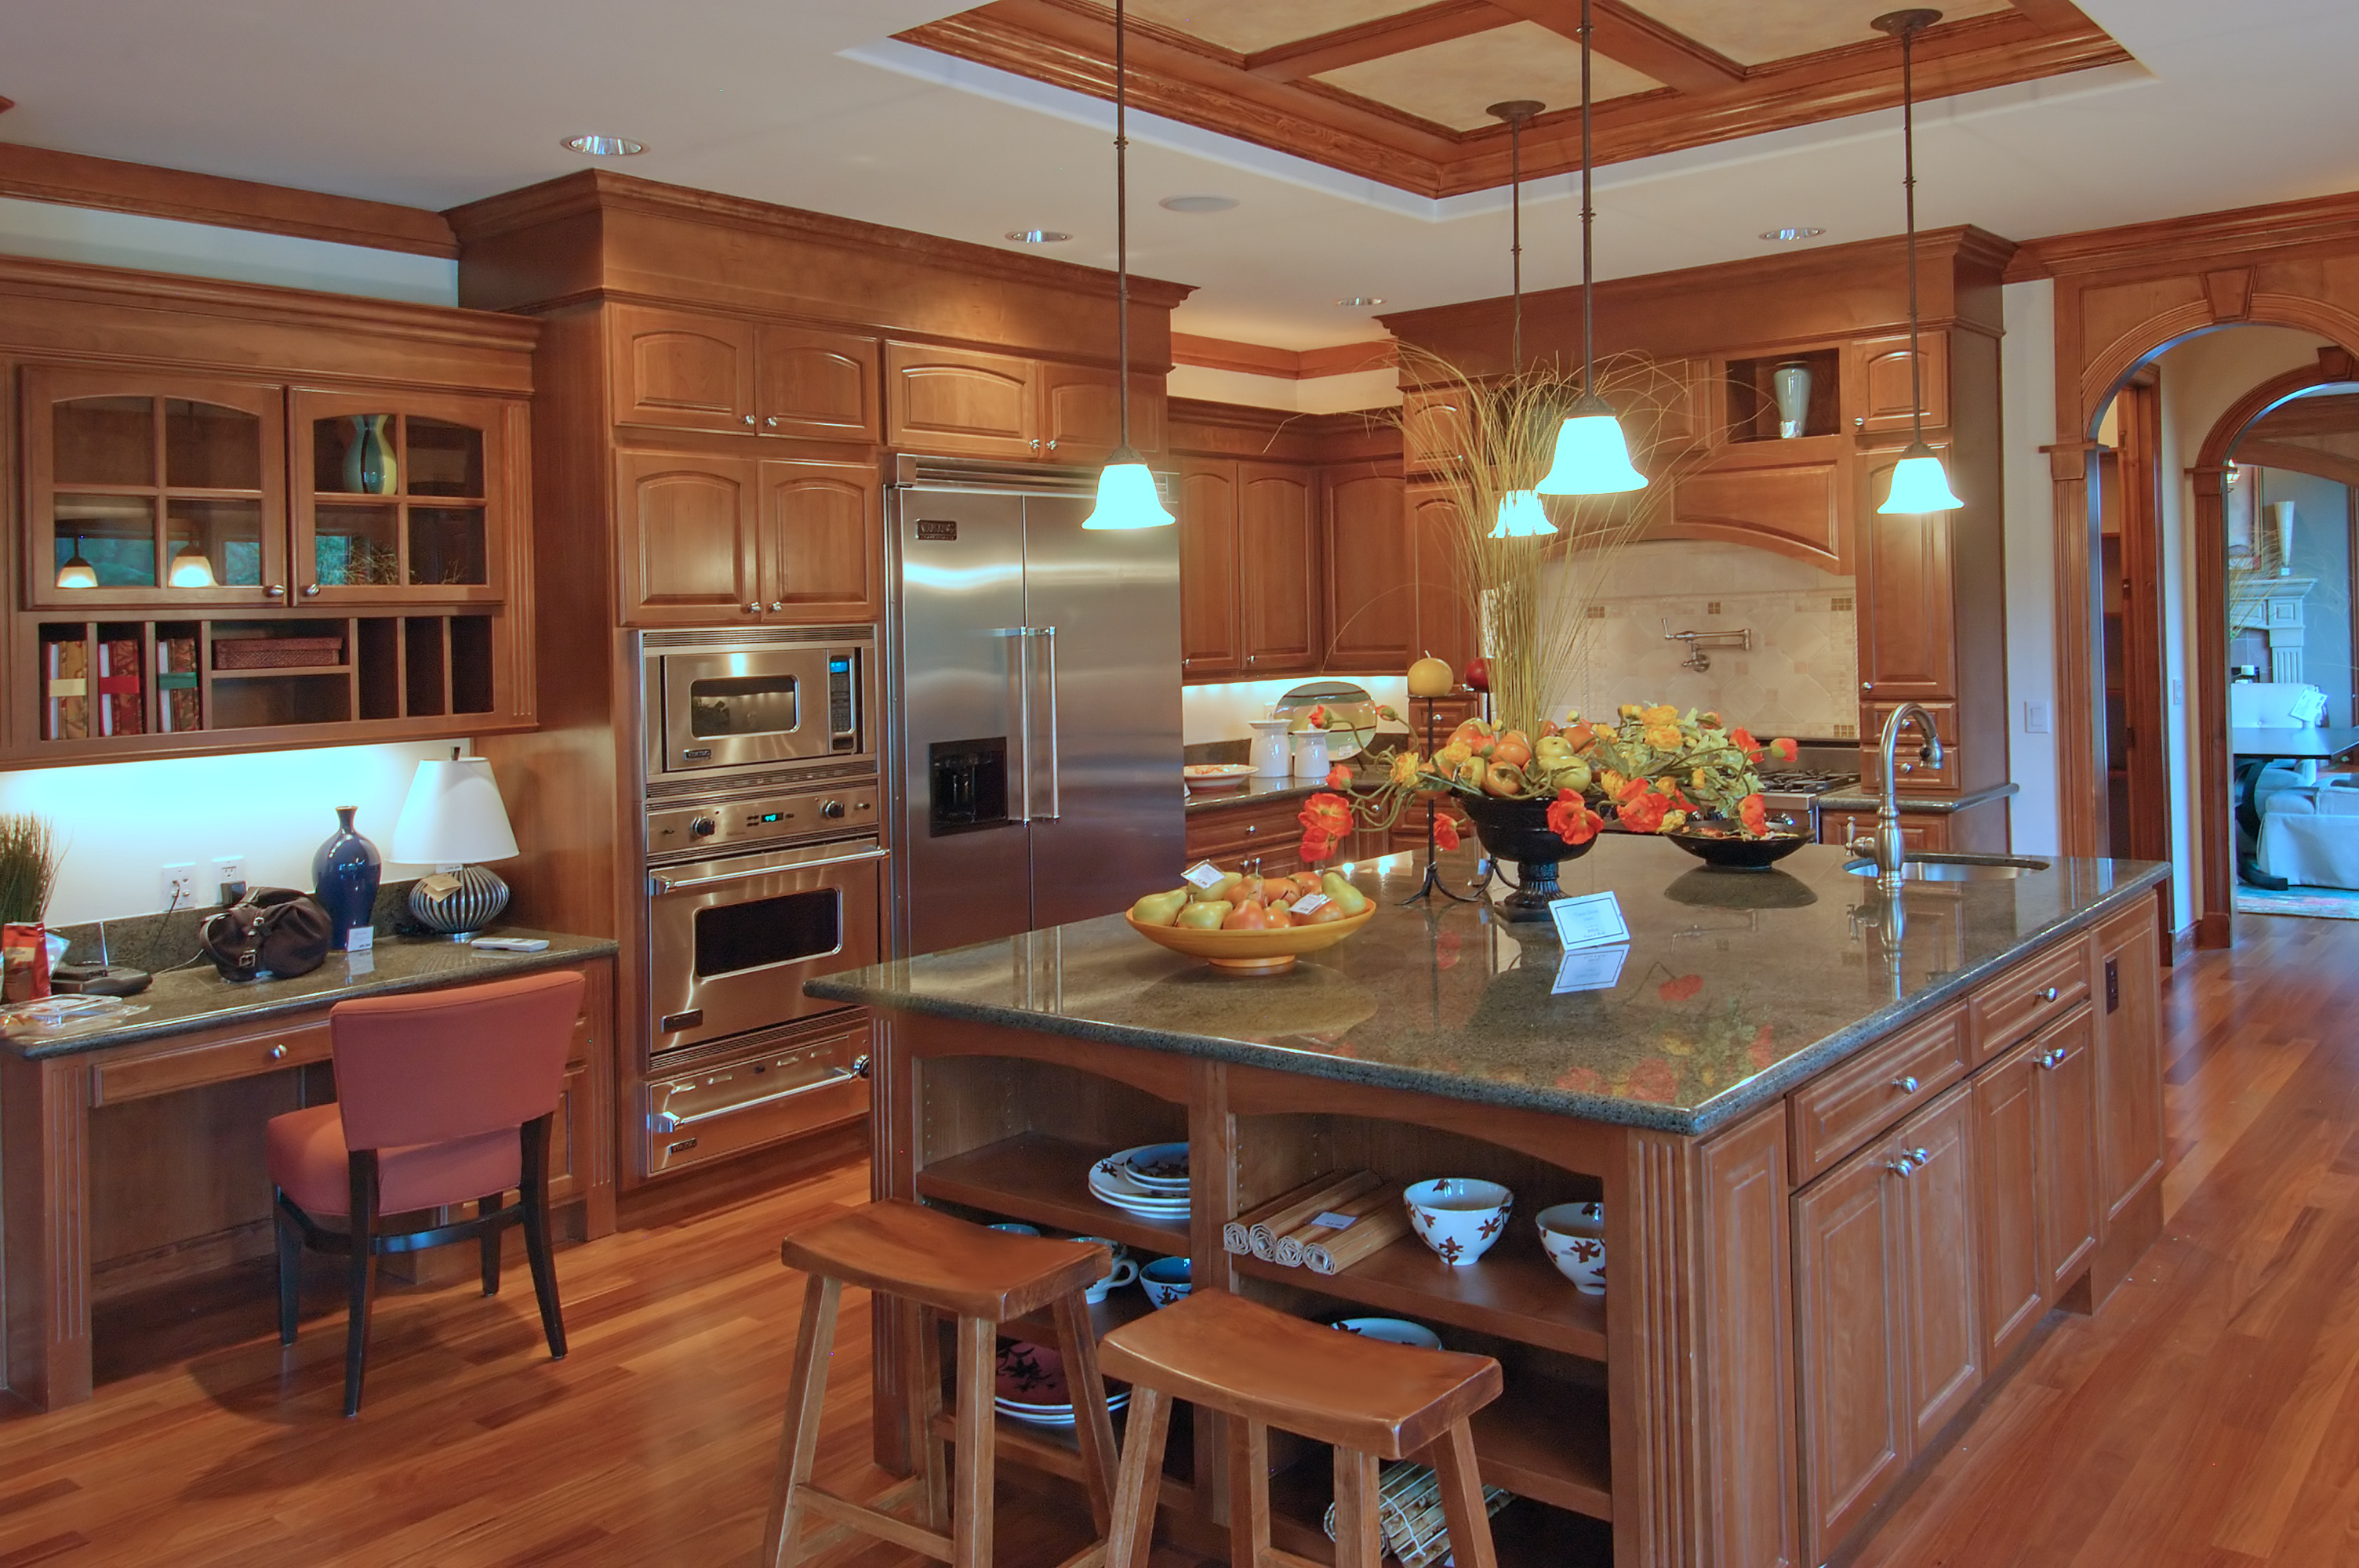 Homebuyers are looking for large kitchens